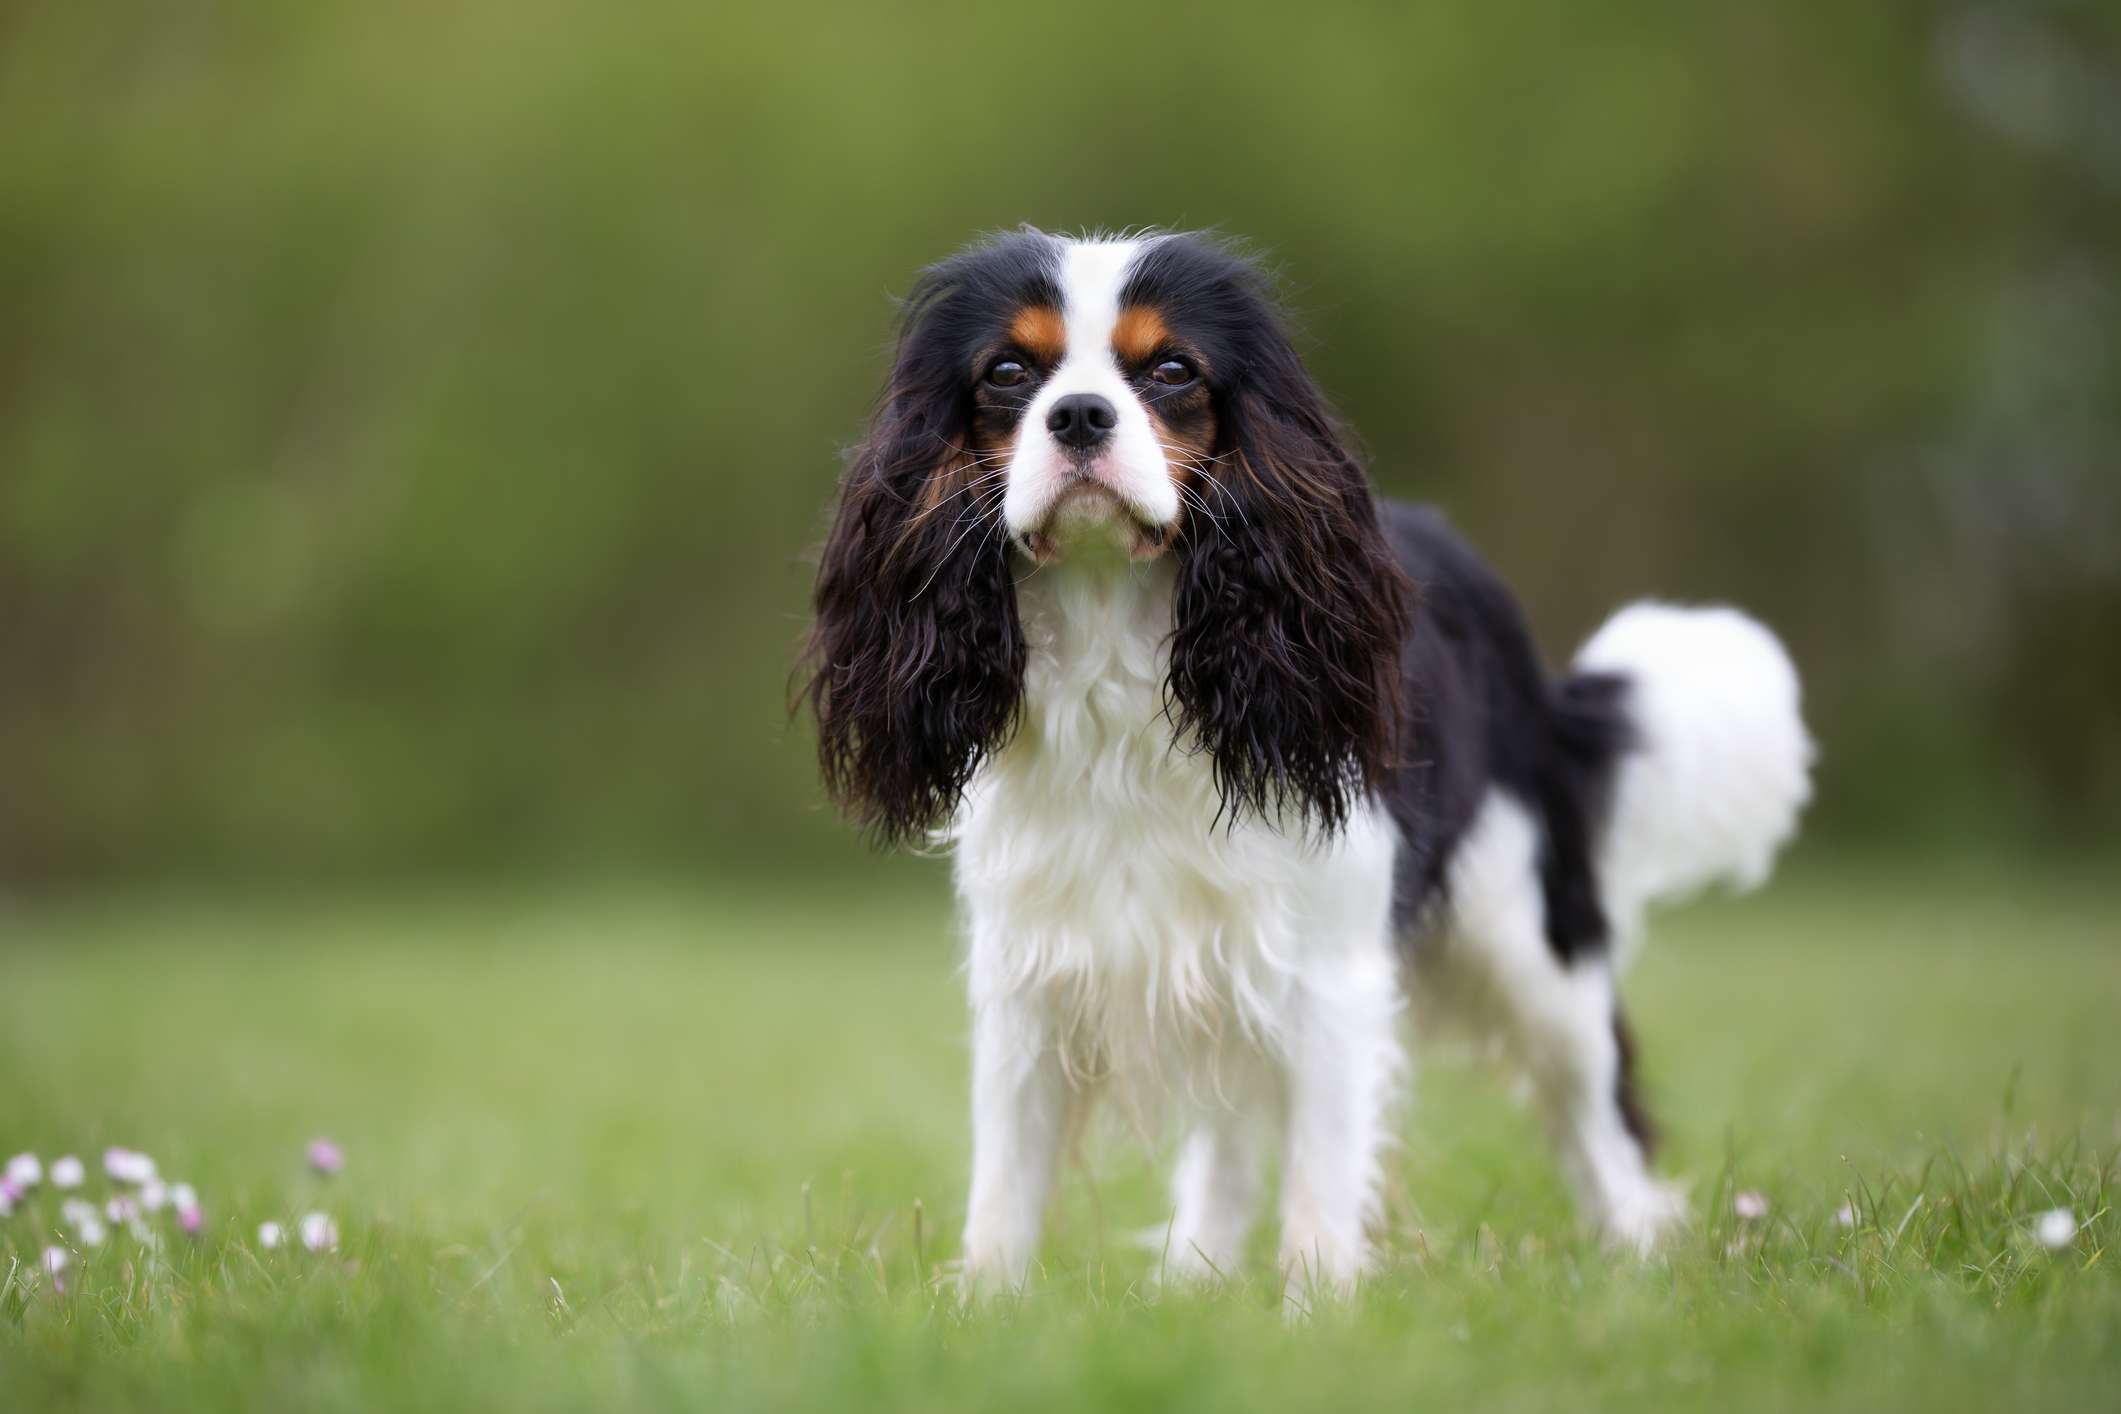 Tri-color Cavalier King Charles Spaniel standing on grass